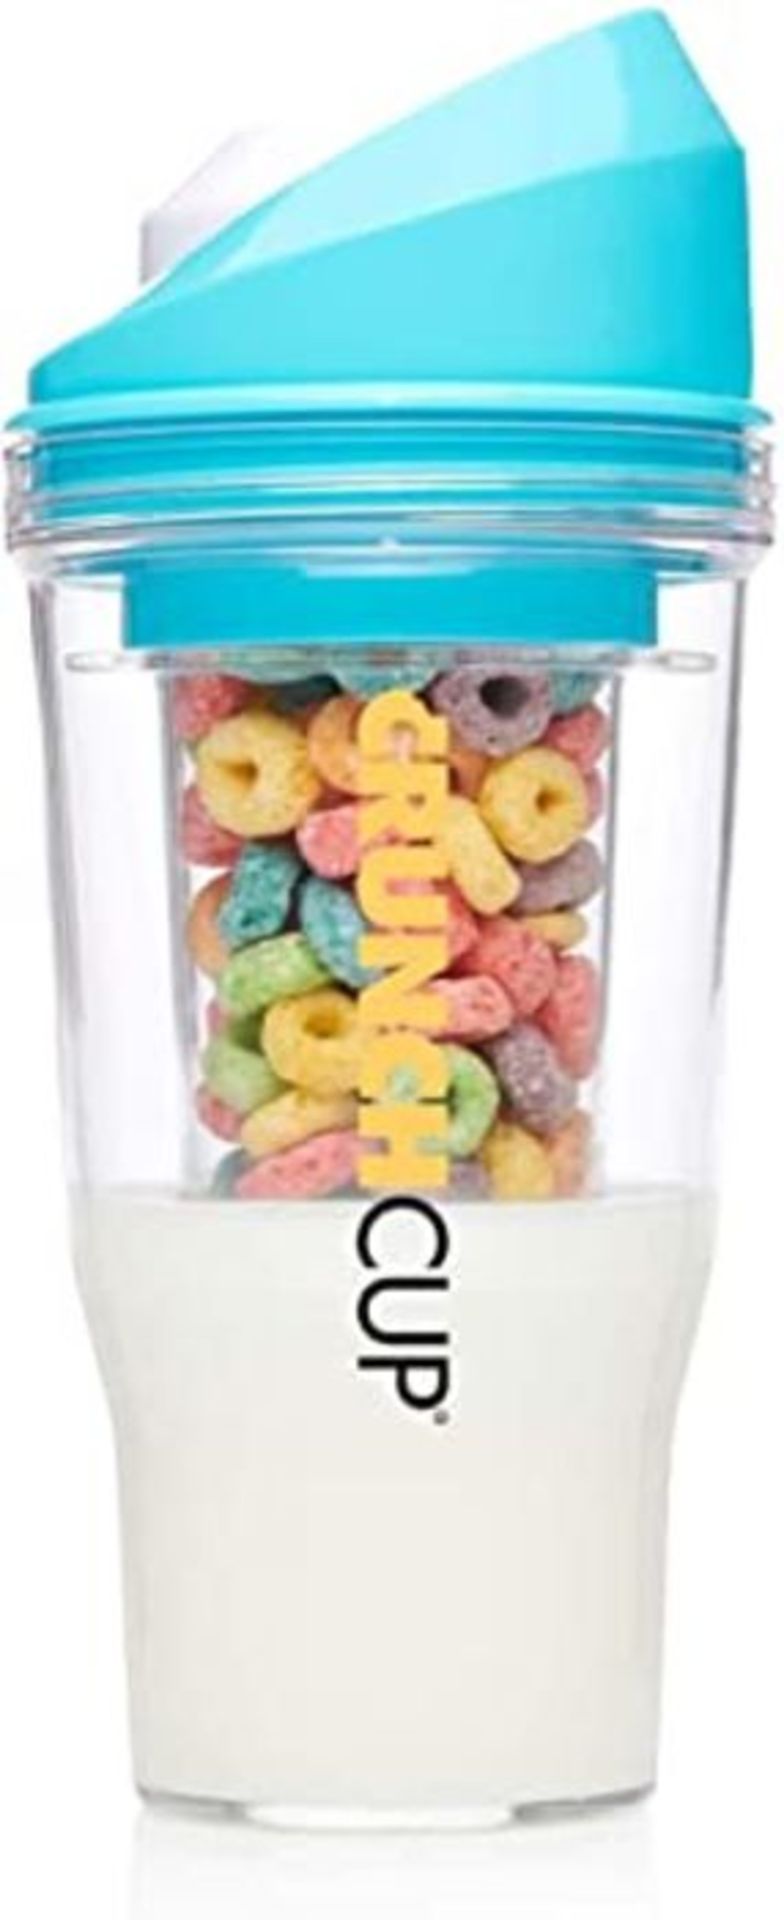 CRUNCHCUP The XL - A Portable Cereal Cup - No Spoon. No Bowl. It's Cereal On The Go. (